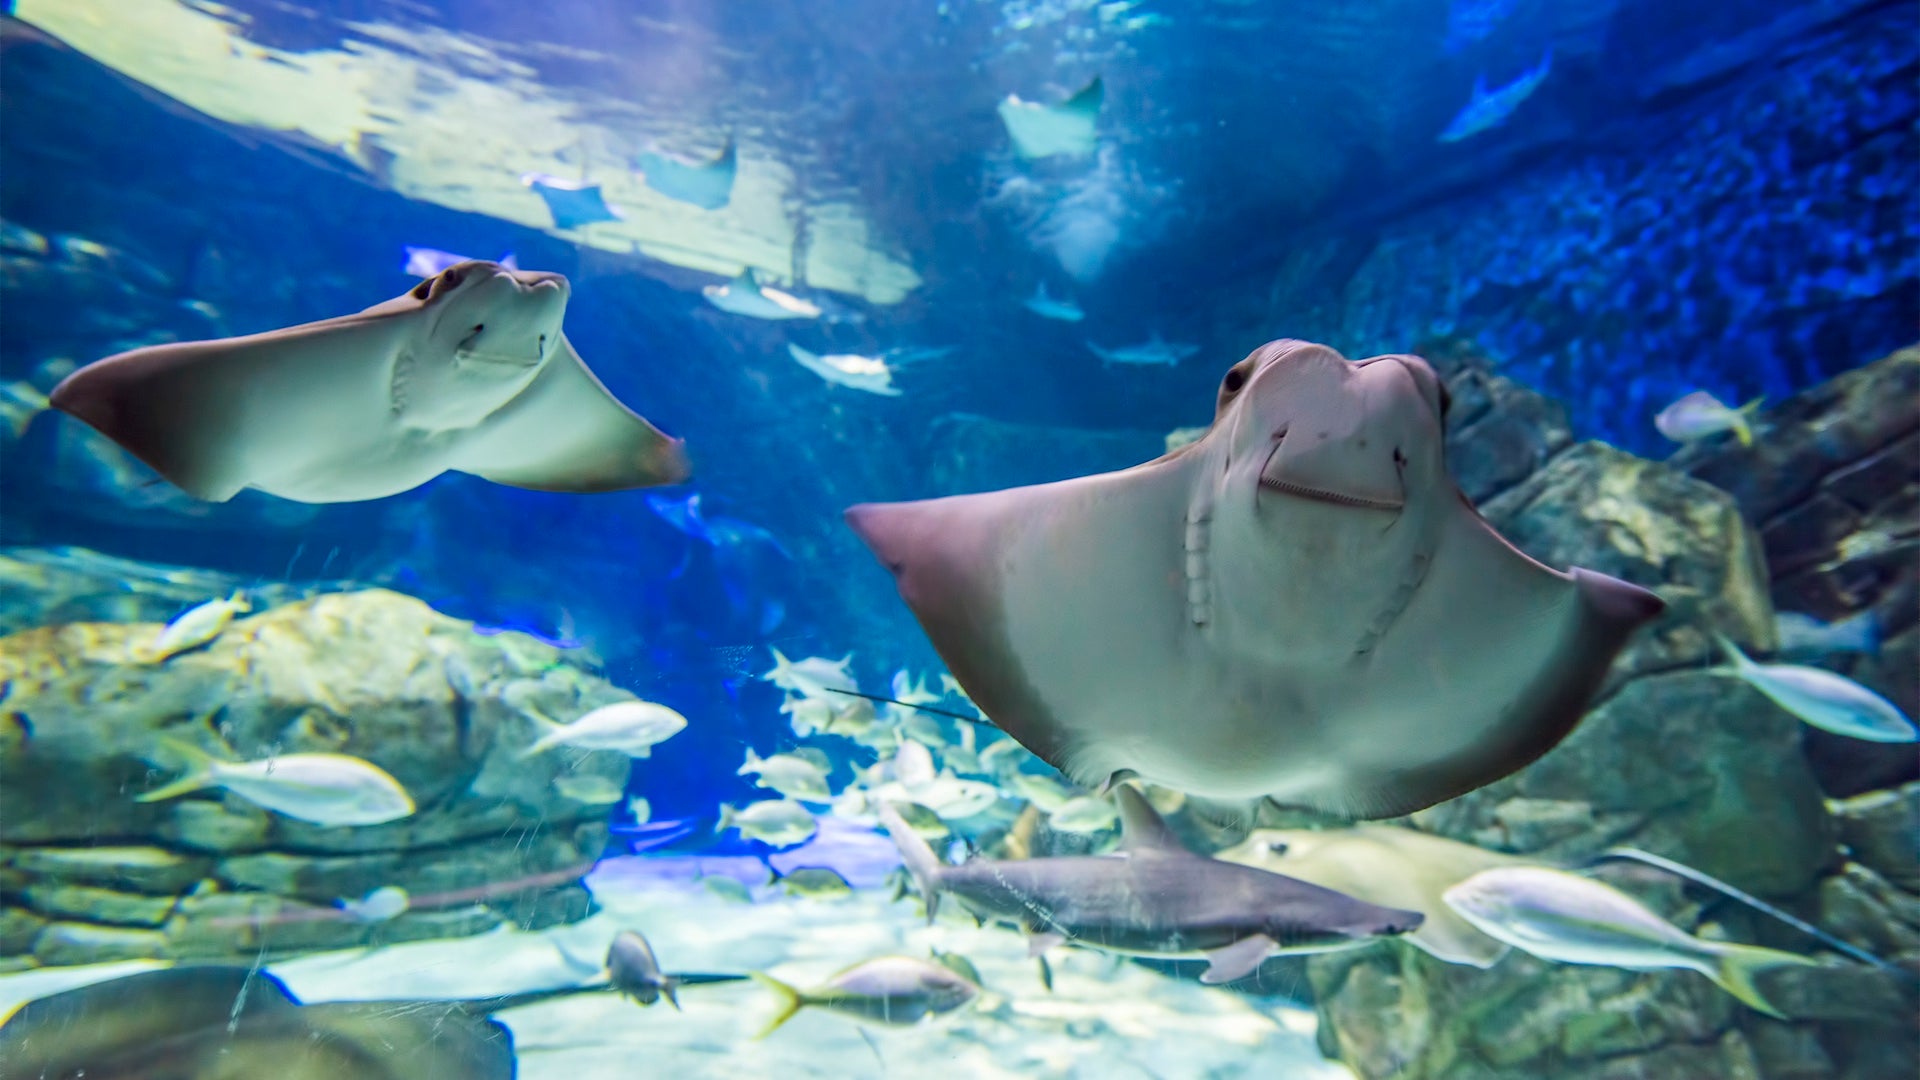 Two rays in an tank filled with fish at the Ripley’s Aquarium of Canada